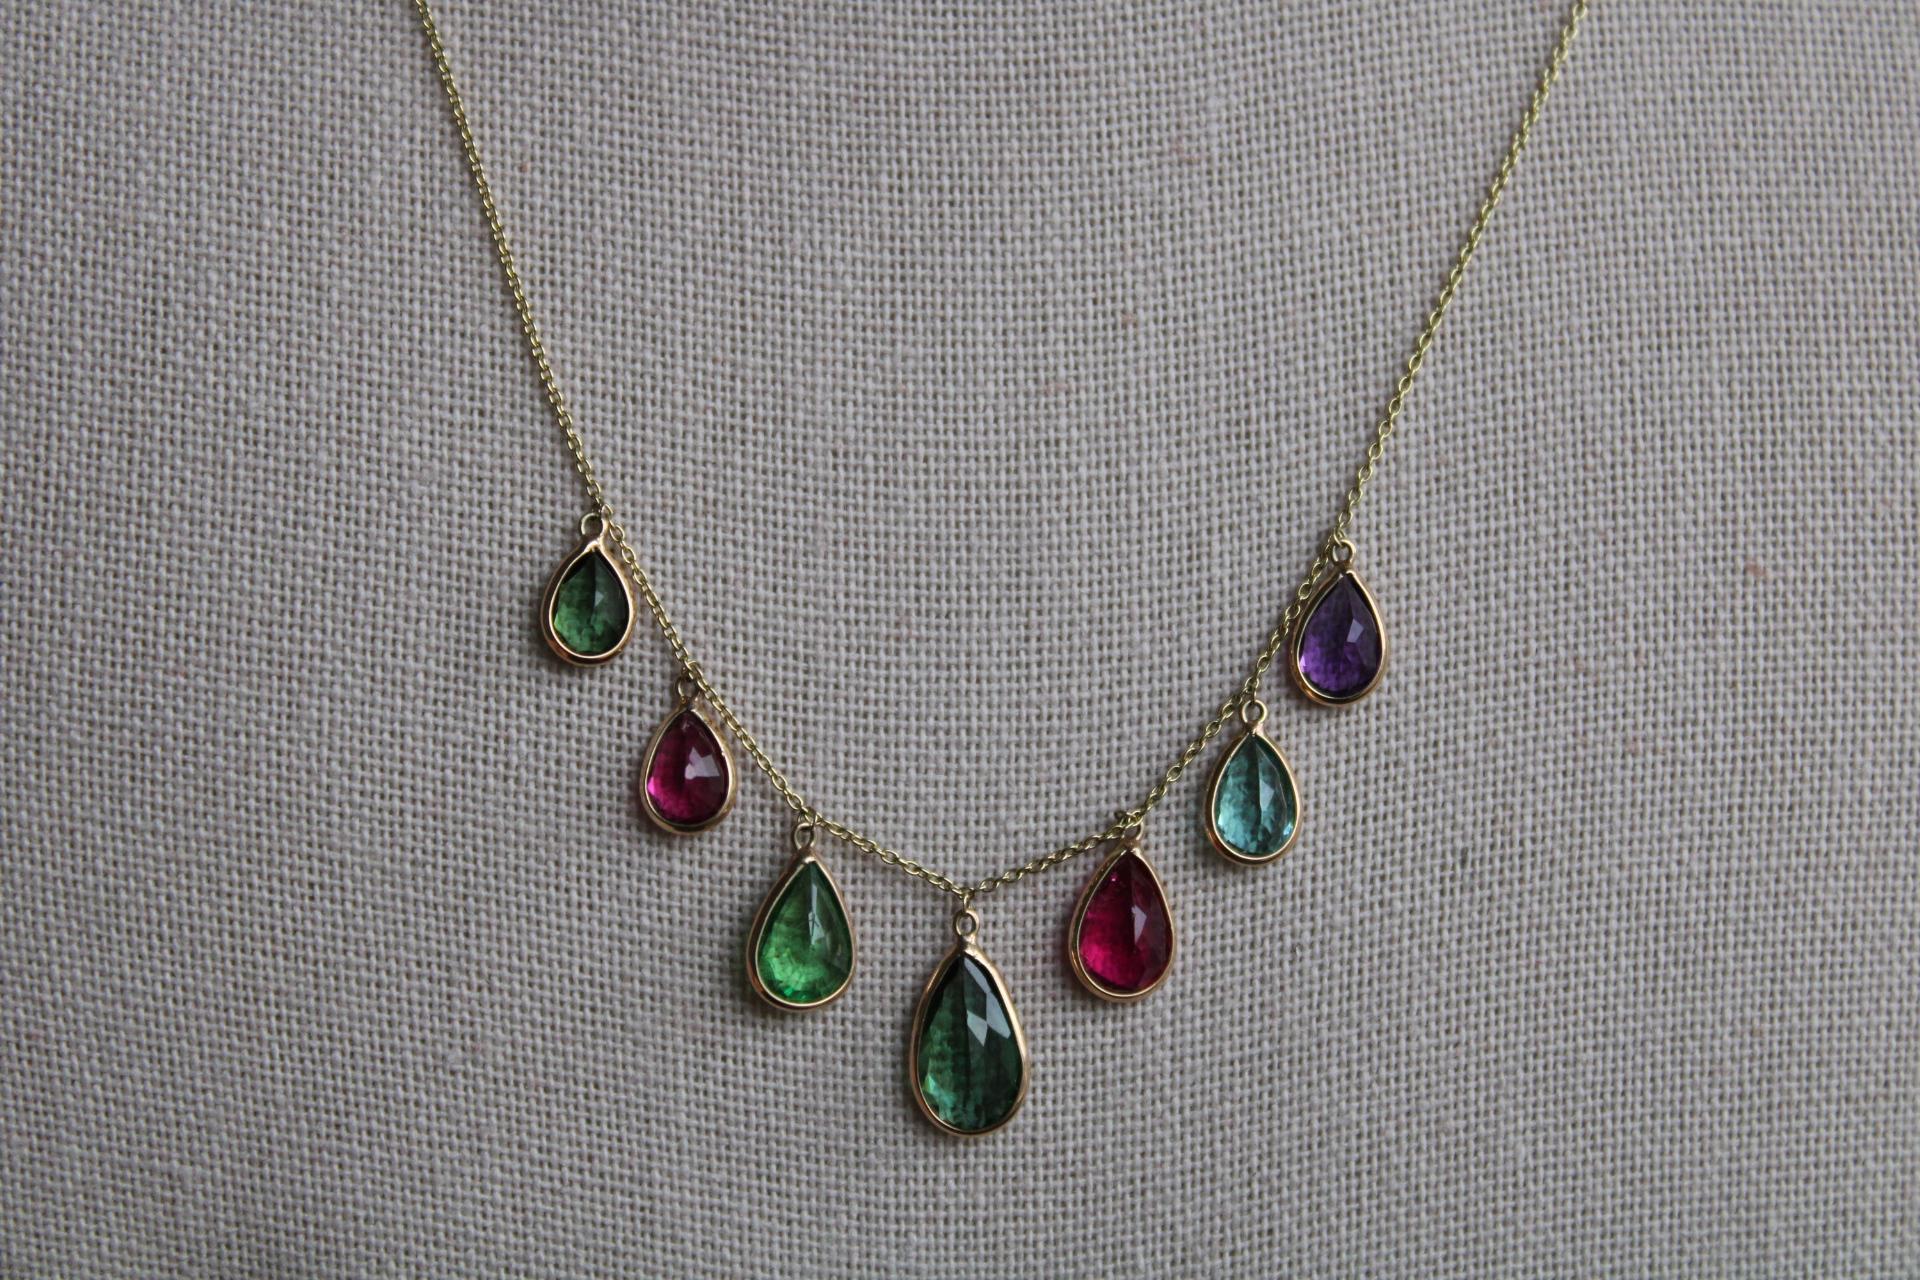 This beautiful multicolor stone 14K gold necklace is comprise of 7 pears. The center stone in a dark hunter green tourmaline, there are 2 lighter sage green tourmalines as well as 2 pink tourmalines. The necklace features 1 amethyst and 1 aquamarine